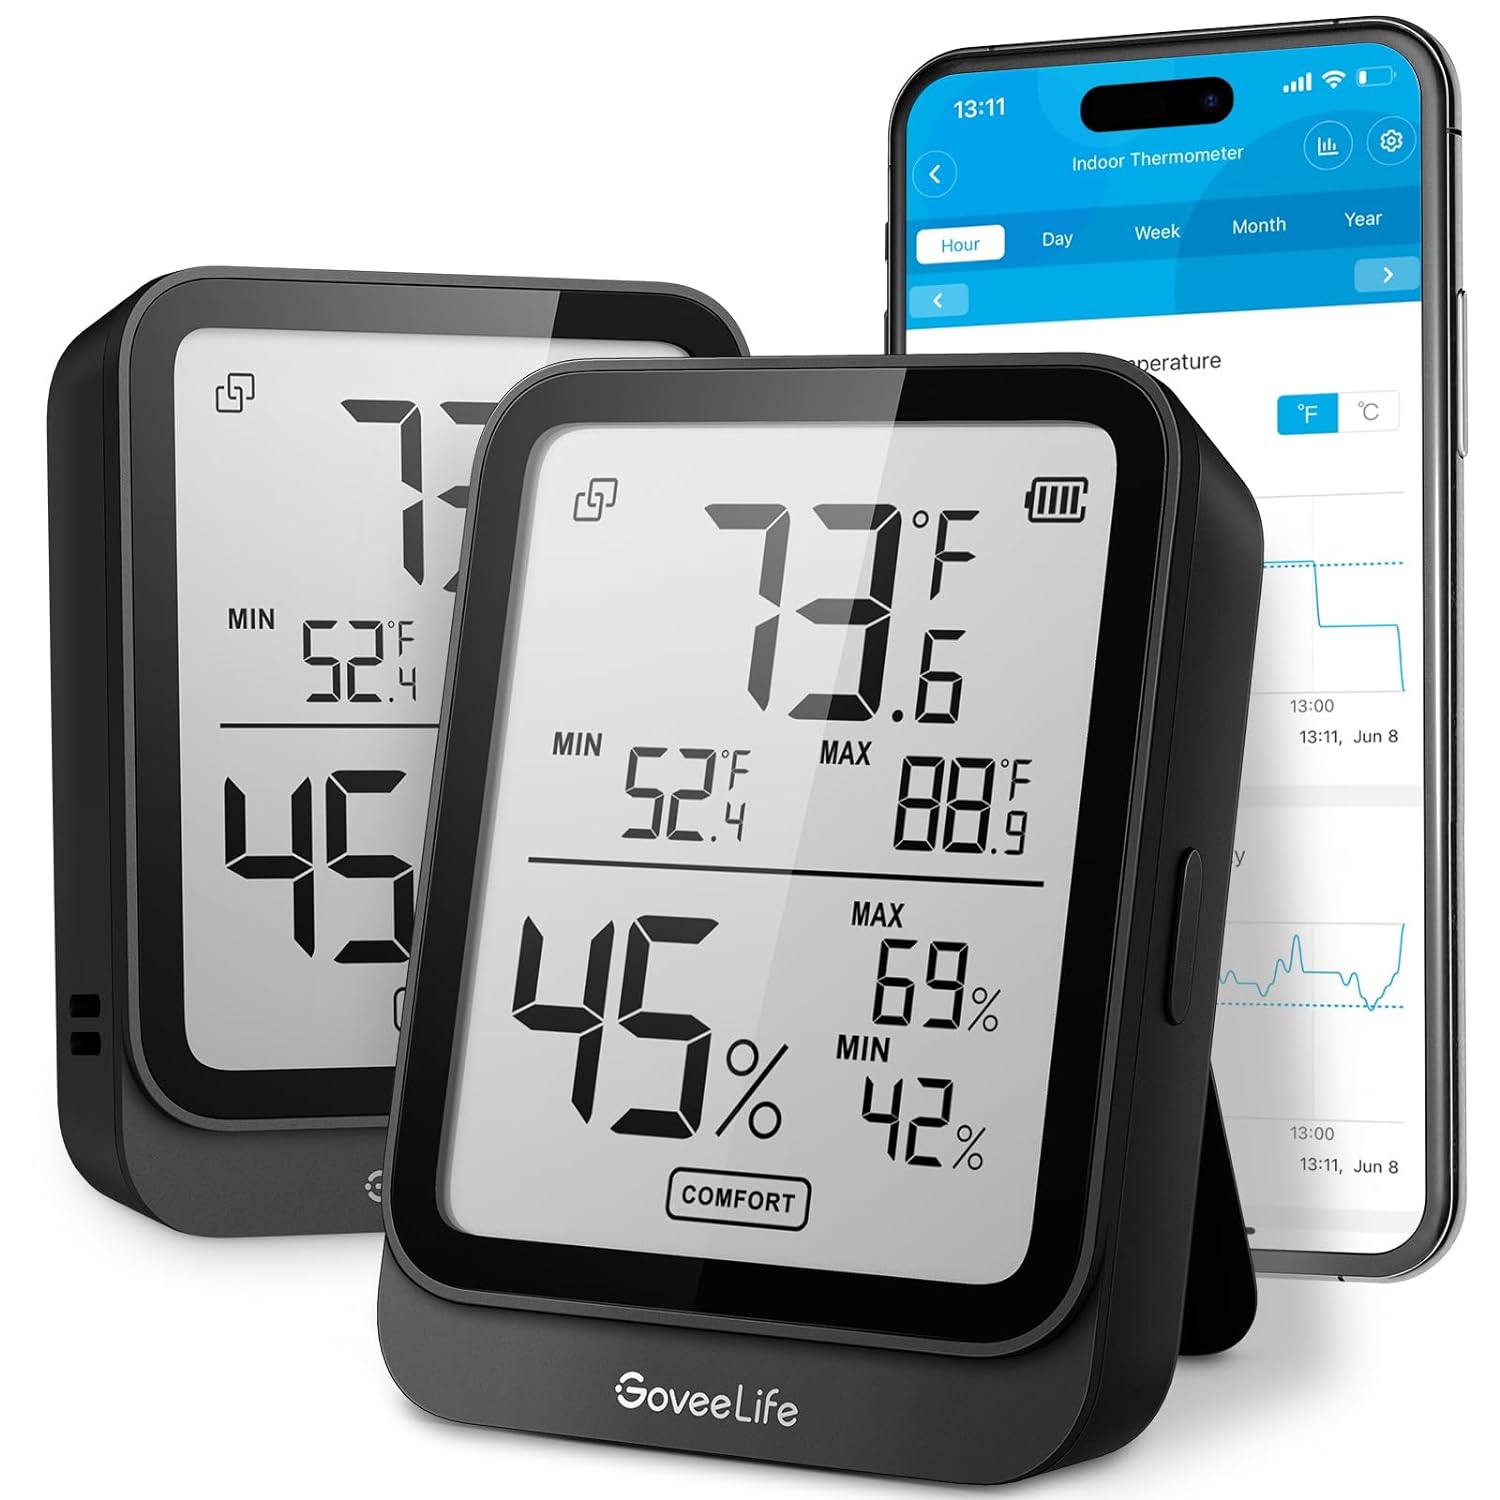 https://greenhousegardenpros.info/wp-content/uploads/2023/10/goveelife-hygrometer-thermometer-h5104-2pack-bluetooth-room-temperature-monitor-with-app-alert-and-2-years-date-storage-.jpg